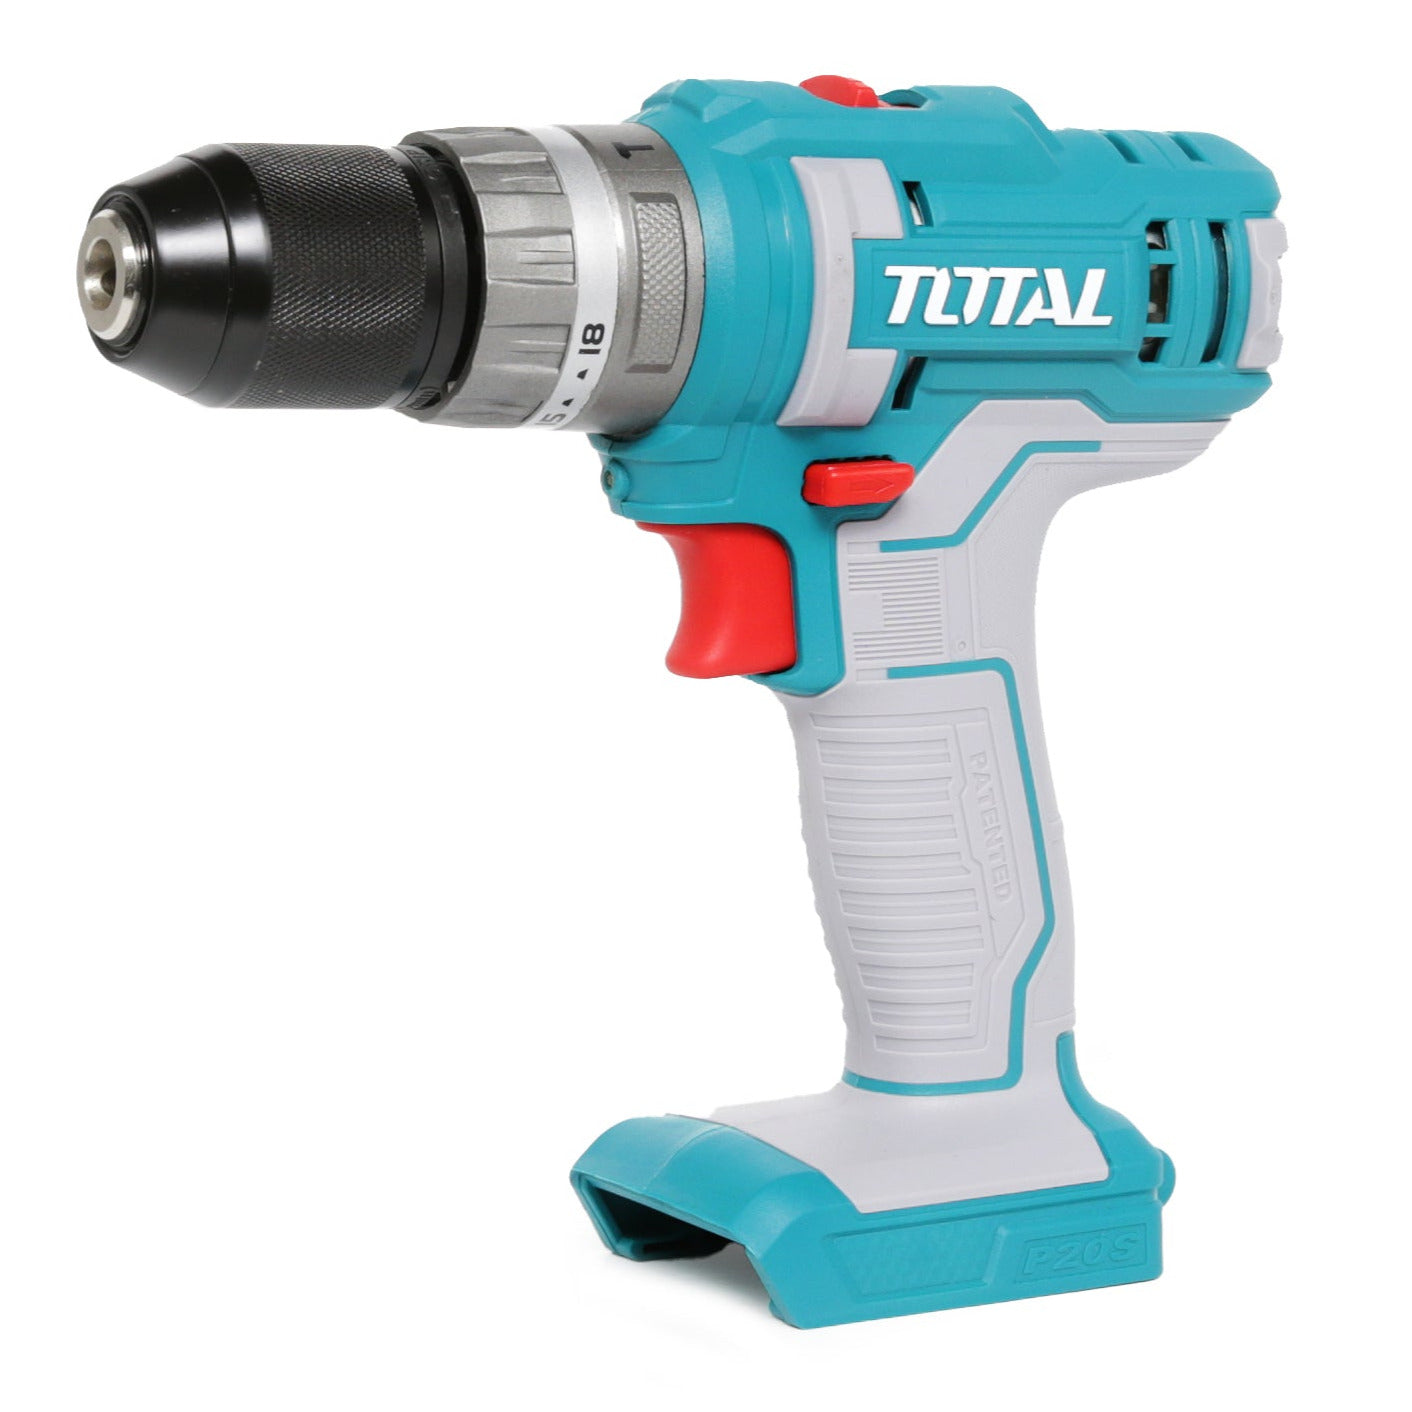 Total Li-Ion 20V Impact Drill (with 2 x Batteries & Charger) - TIDLI201452E